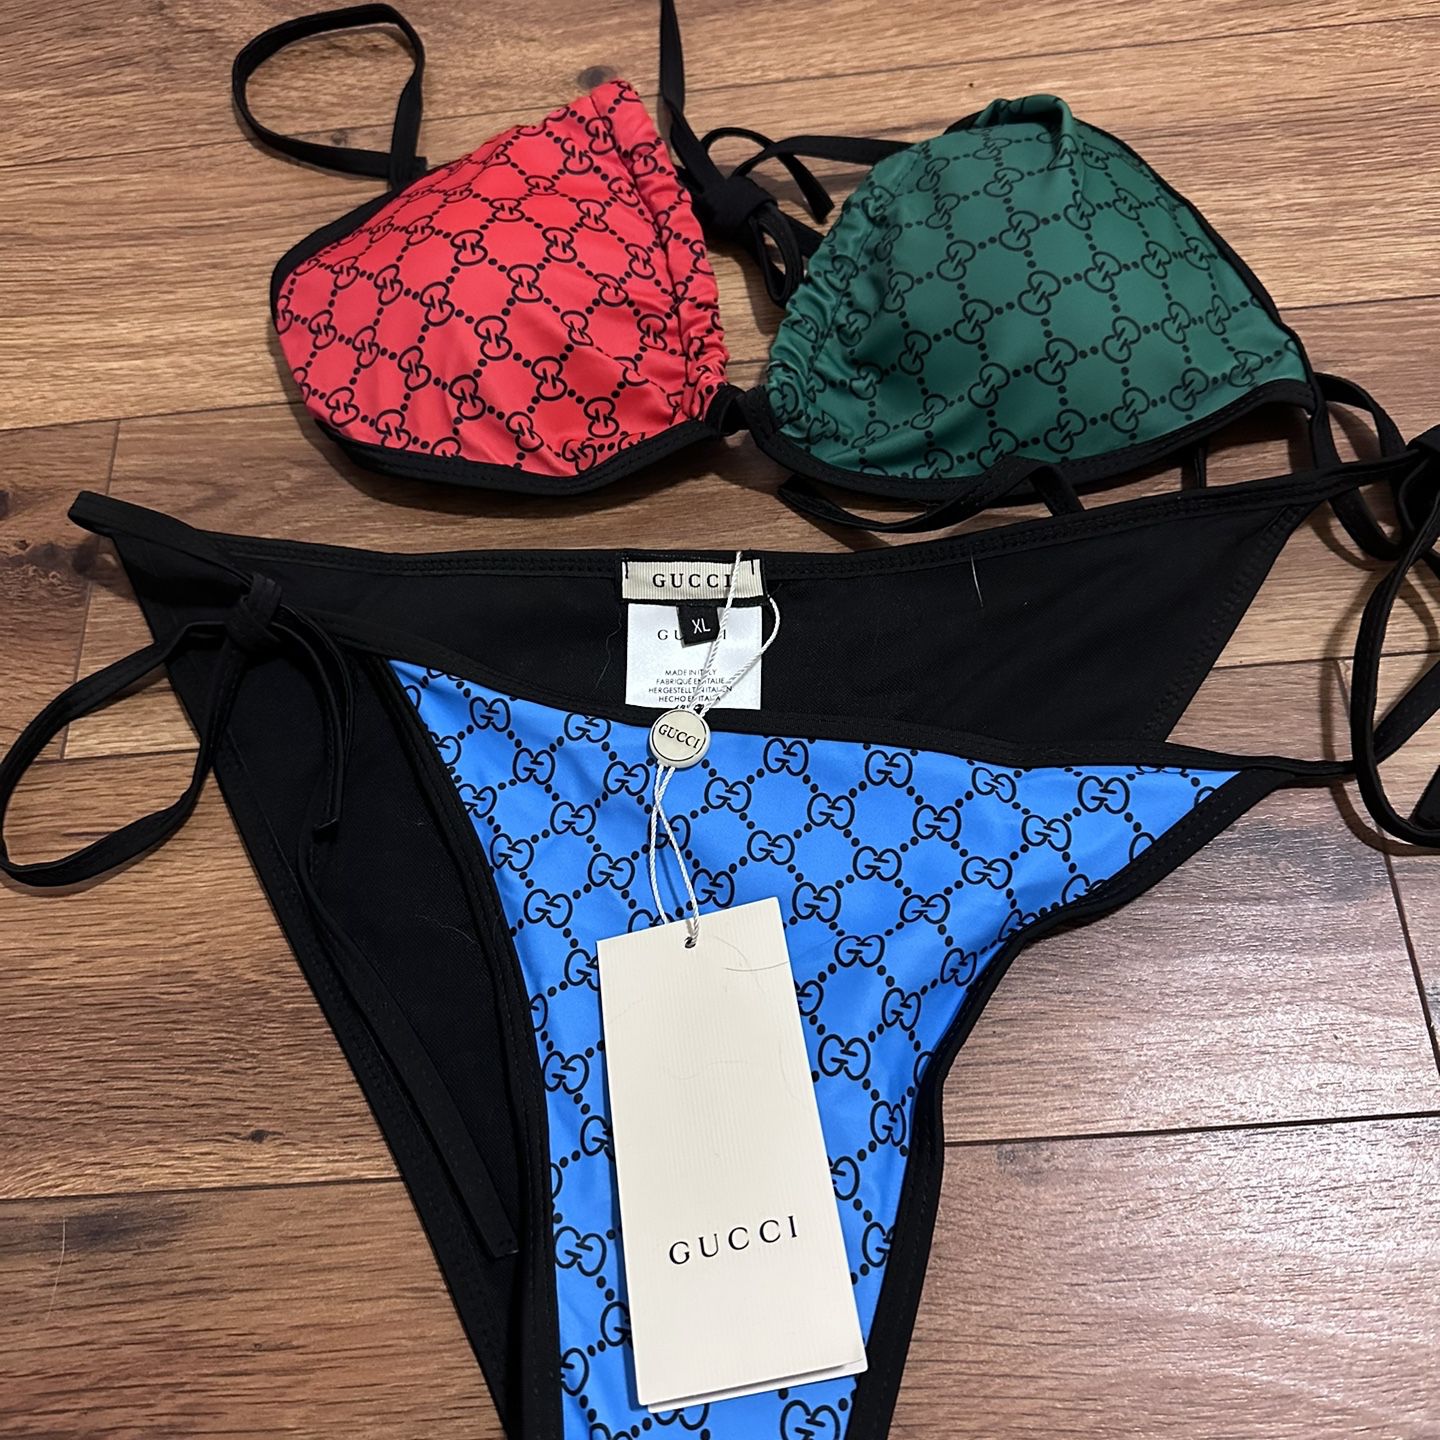 NEW! Replica Gucci swimsuit for Sale in West Islip, NY - OfferUp